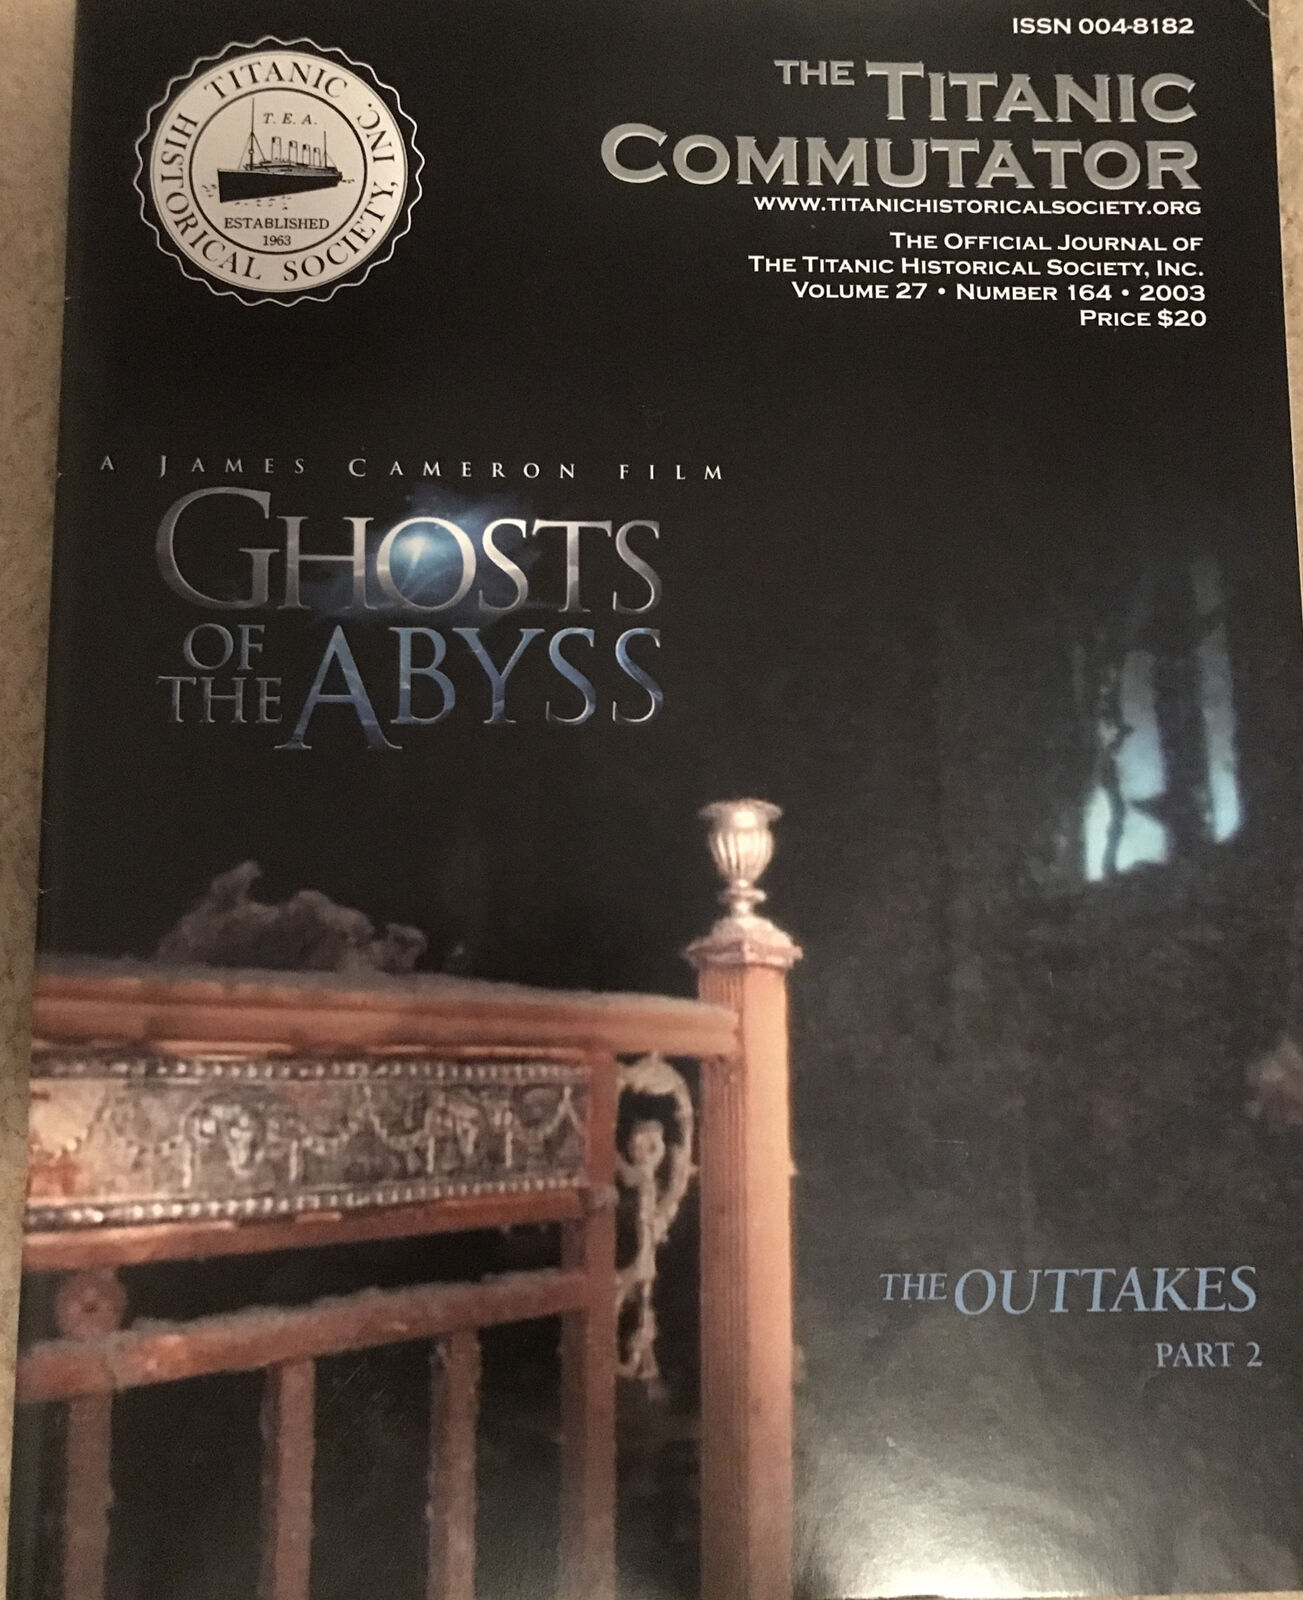 The Titanic Commutator Ghost of the Abyss issue